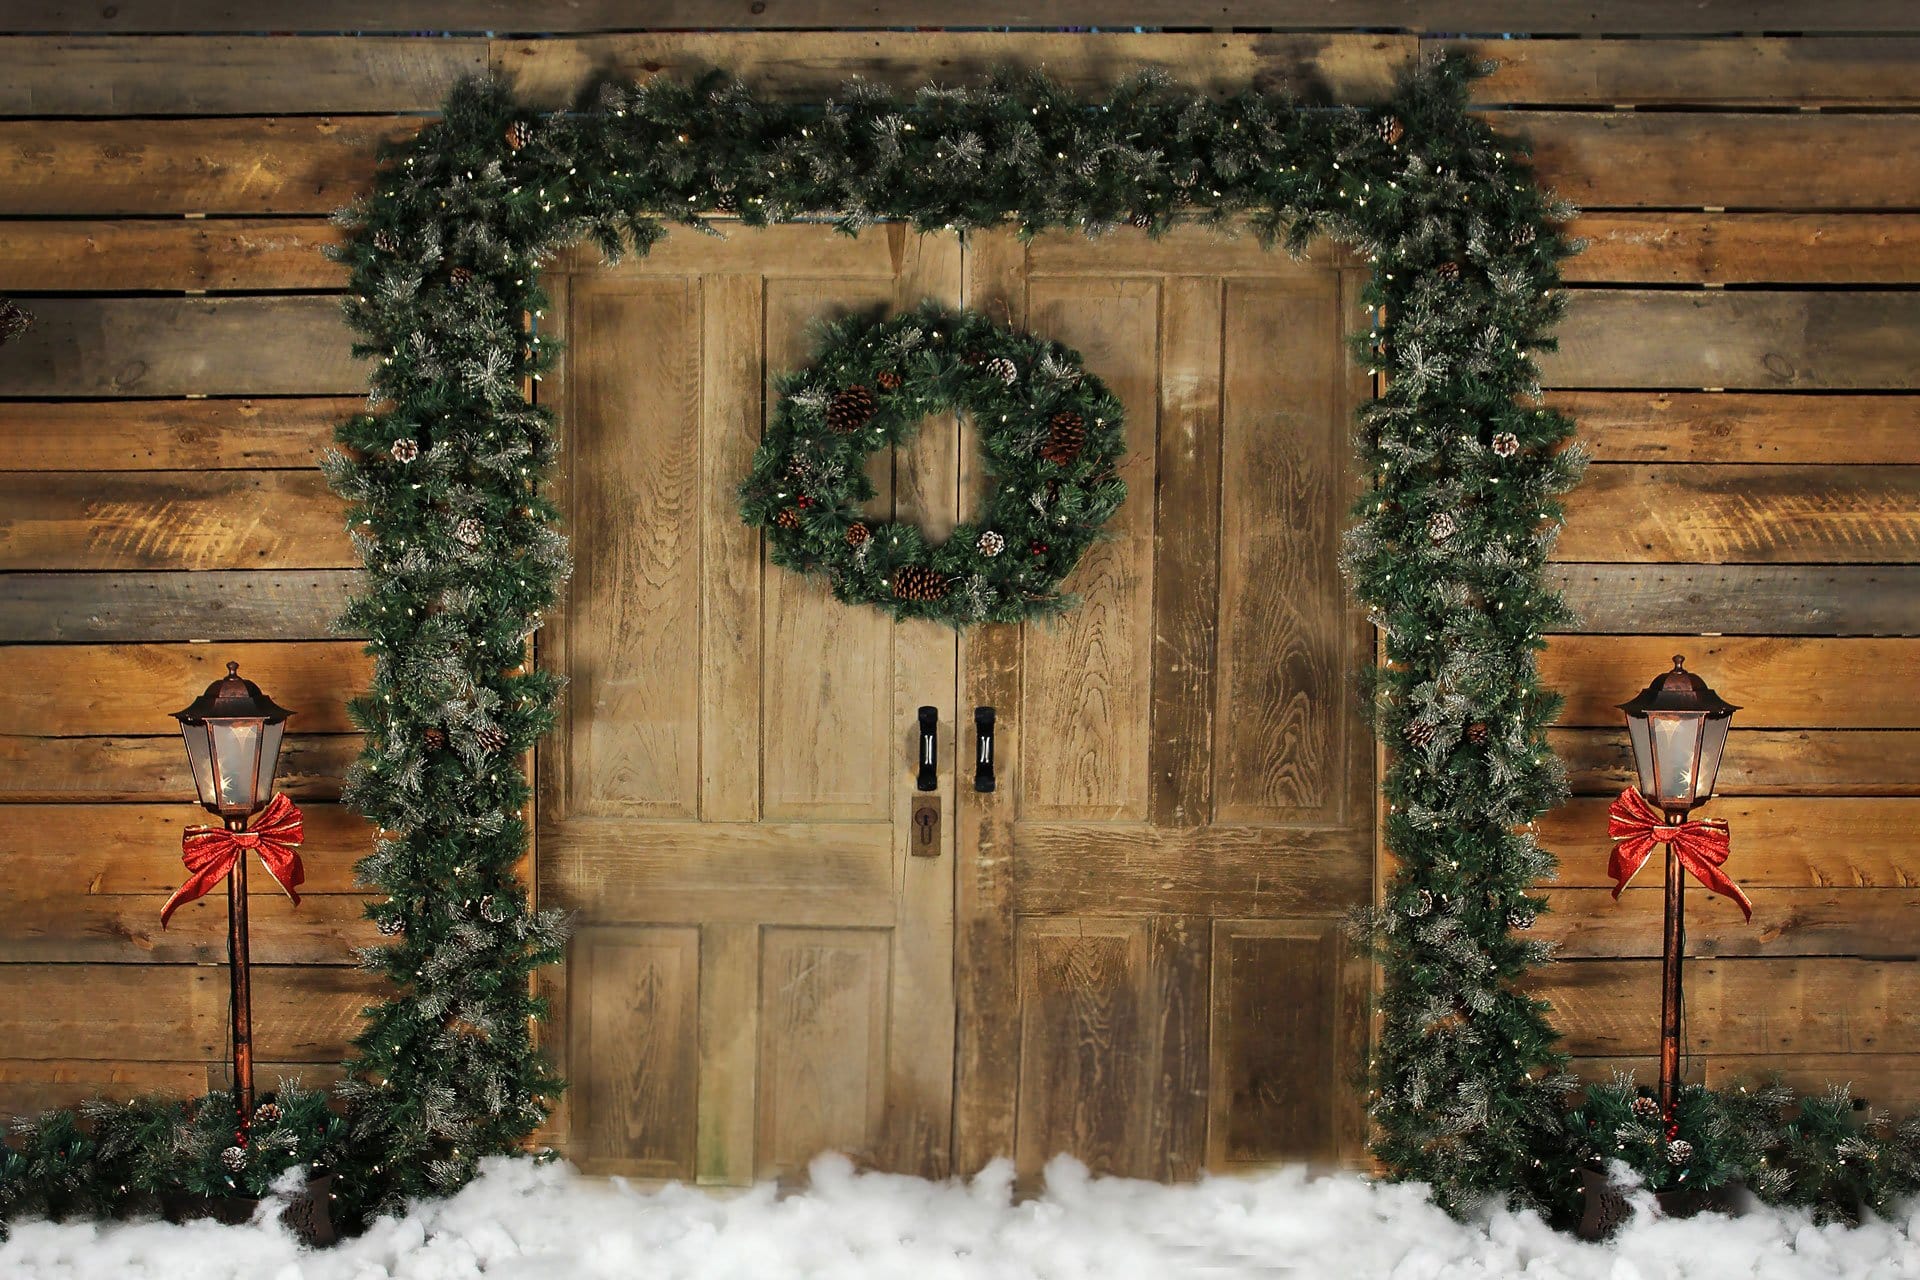 Kate Holiday Door Christmas Wreath Backdrop designed by Arica Kirby